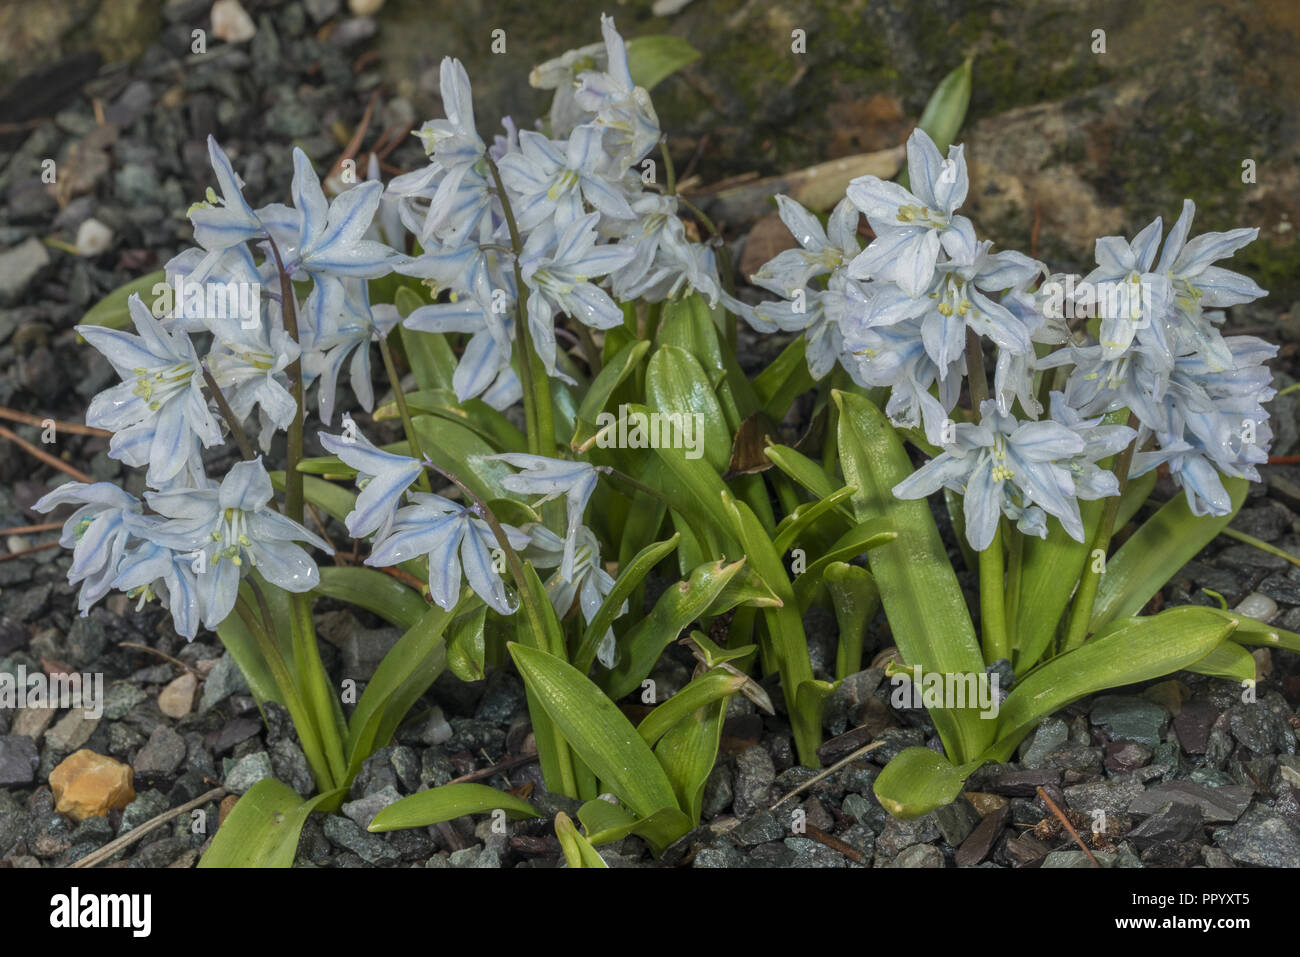 Scilla mischtschenkoana - spring-flowering bulbous plant from the southern Caucasus. Stock Photo